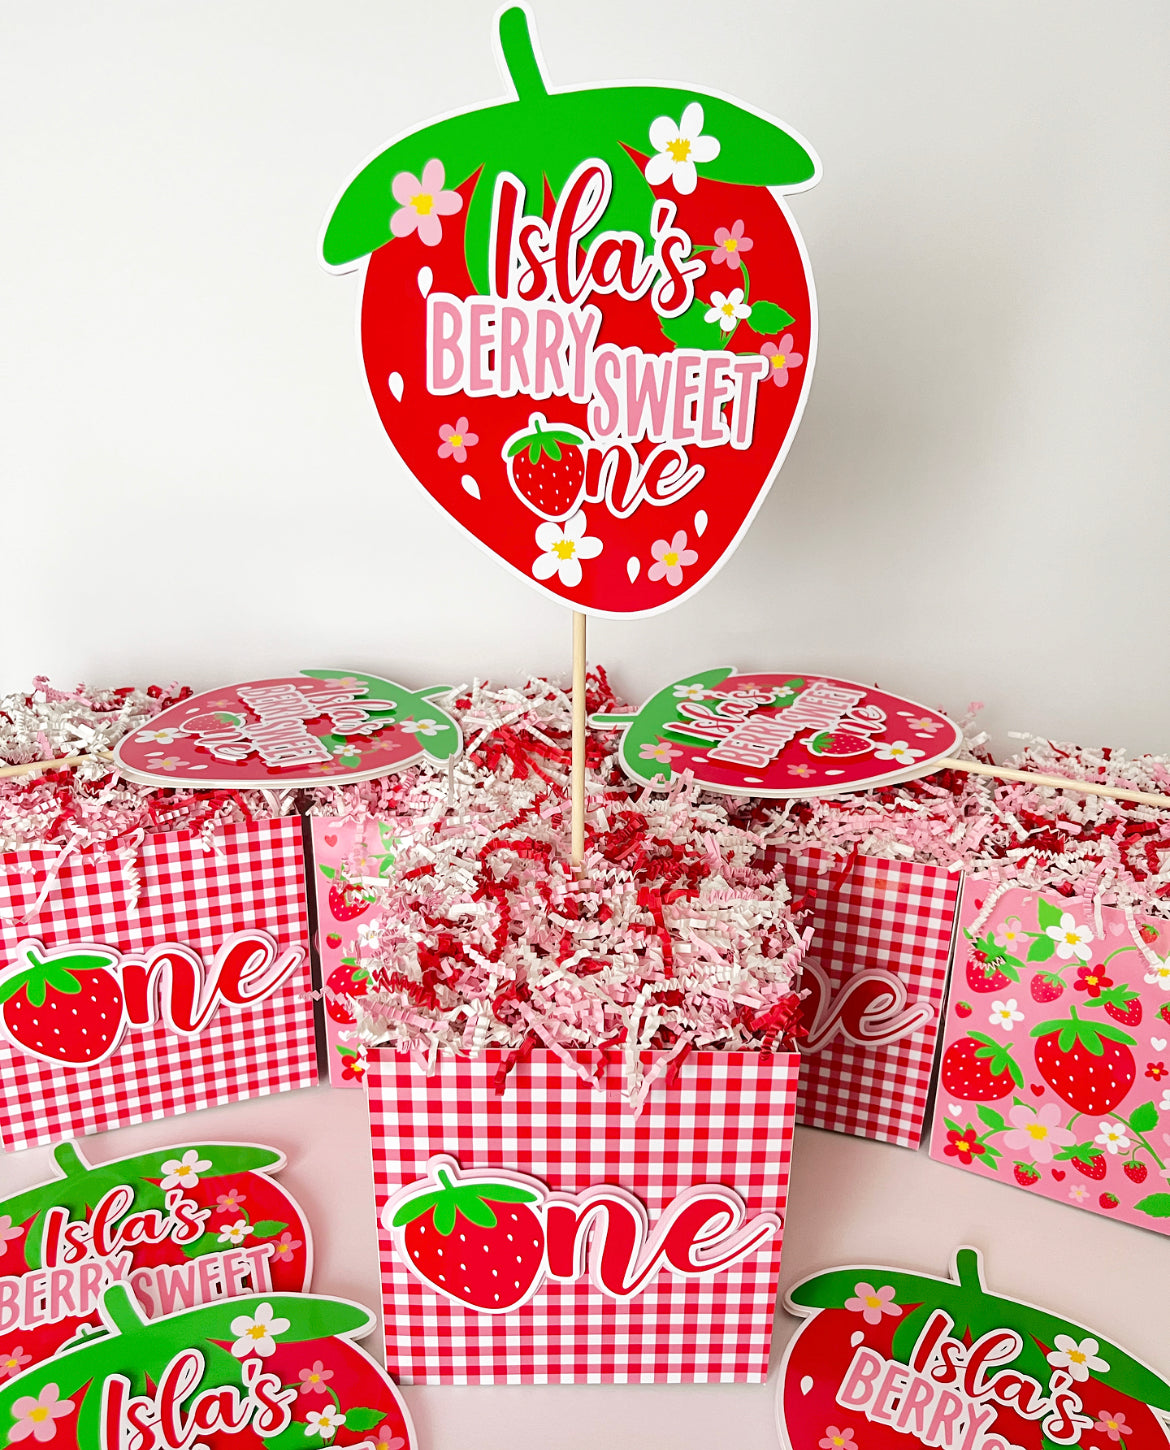 Berry Sweet Strawberry themed Centerpieces